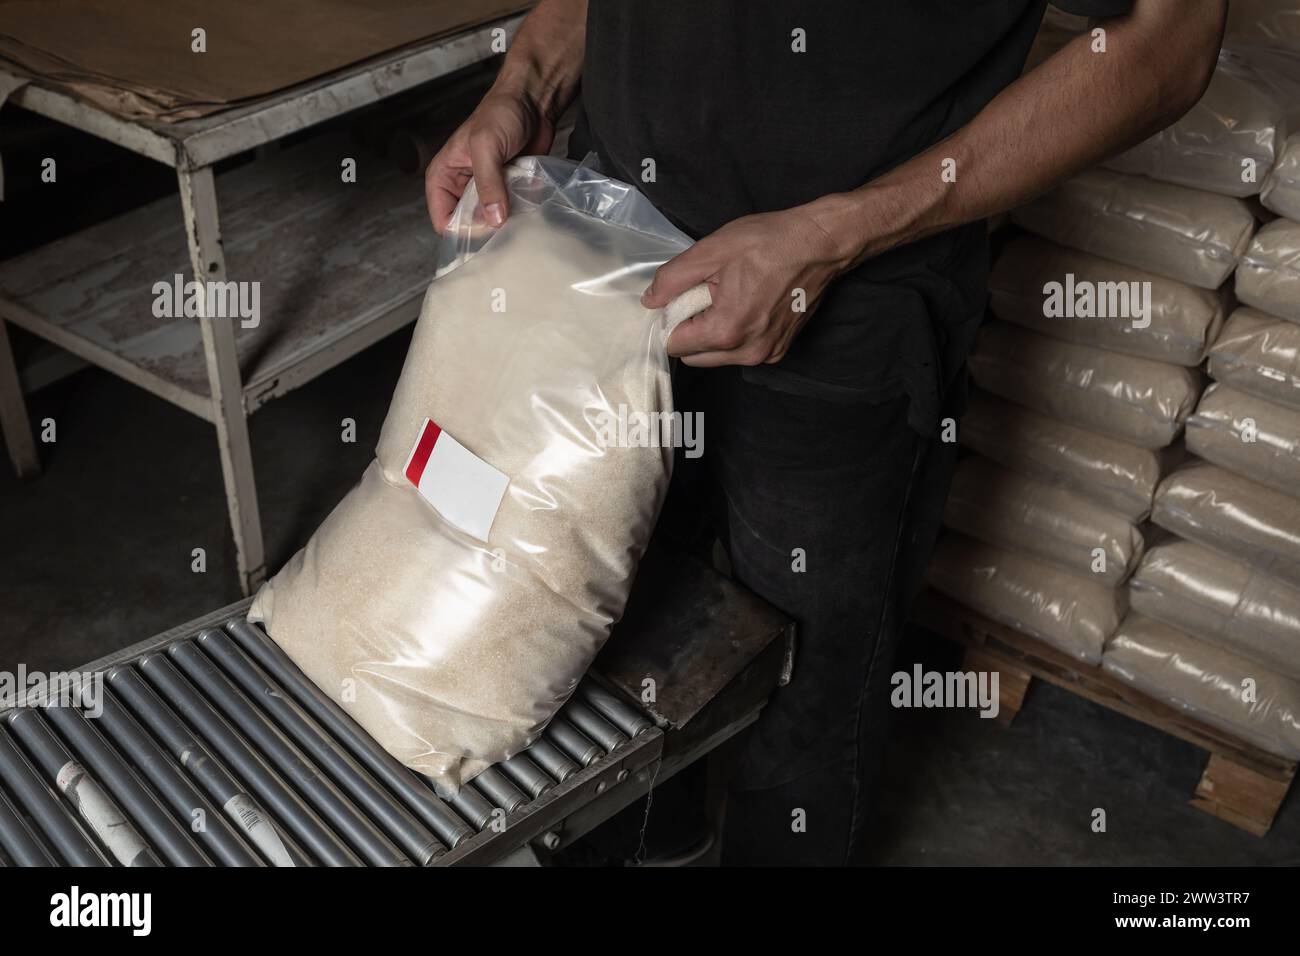 An employee in a dirty workshop is engaged in packing food, takes a full bag of sugar from the assembly line, a concept on the counterfeit manufacture Stock Photo